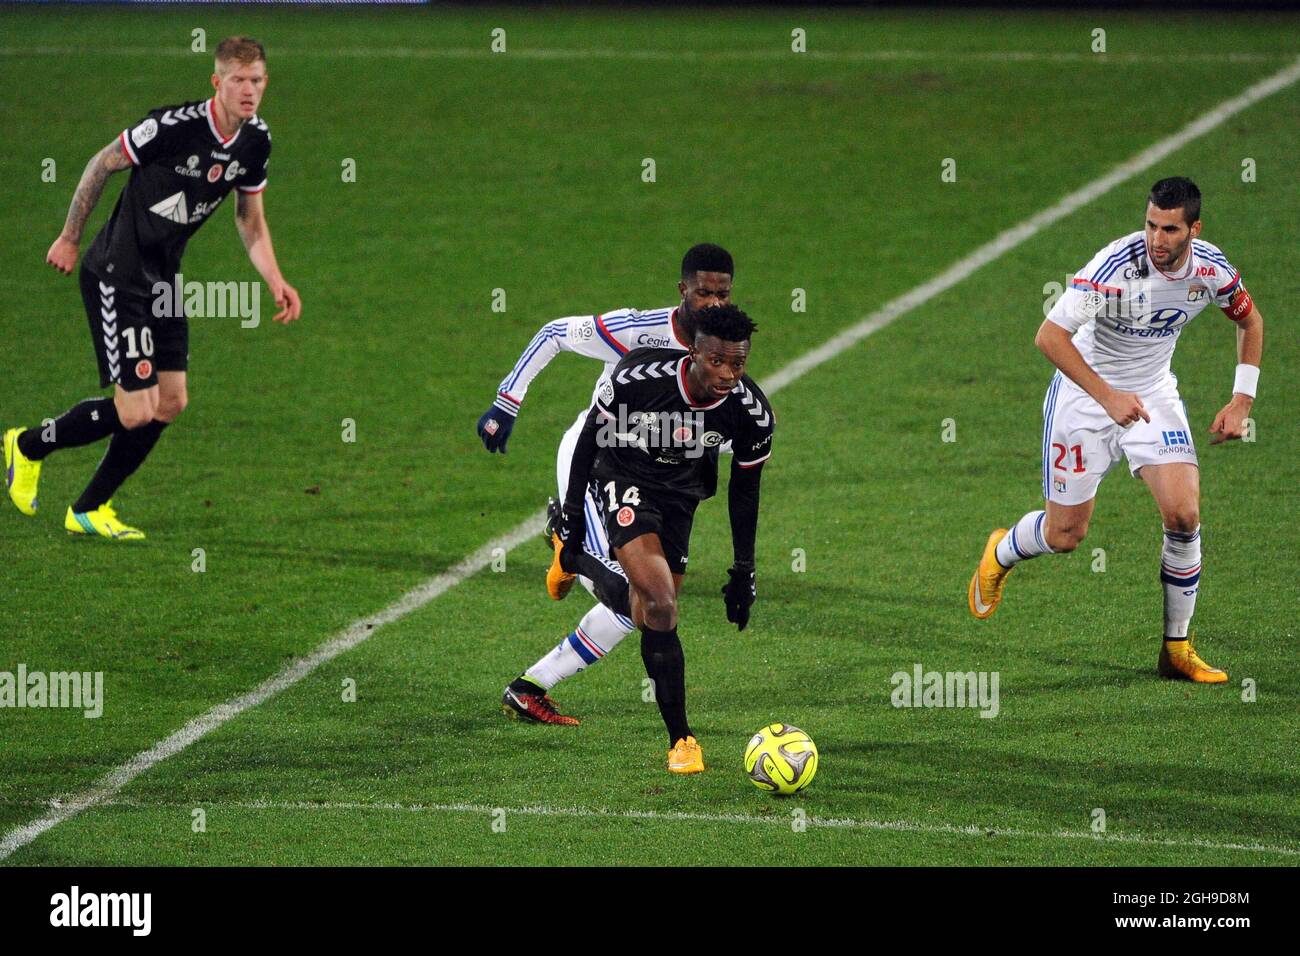 Benjamin Moukandjo in action during Ligue 1 match between Stade de Reims and Lyon at the Stade de Gerland in France on December 04, 2014. Stock Photo